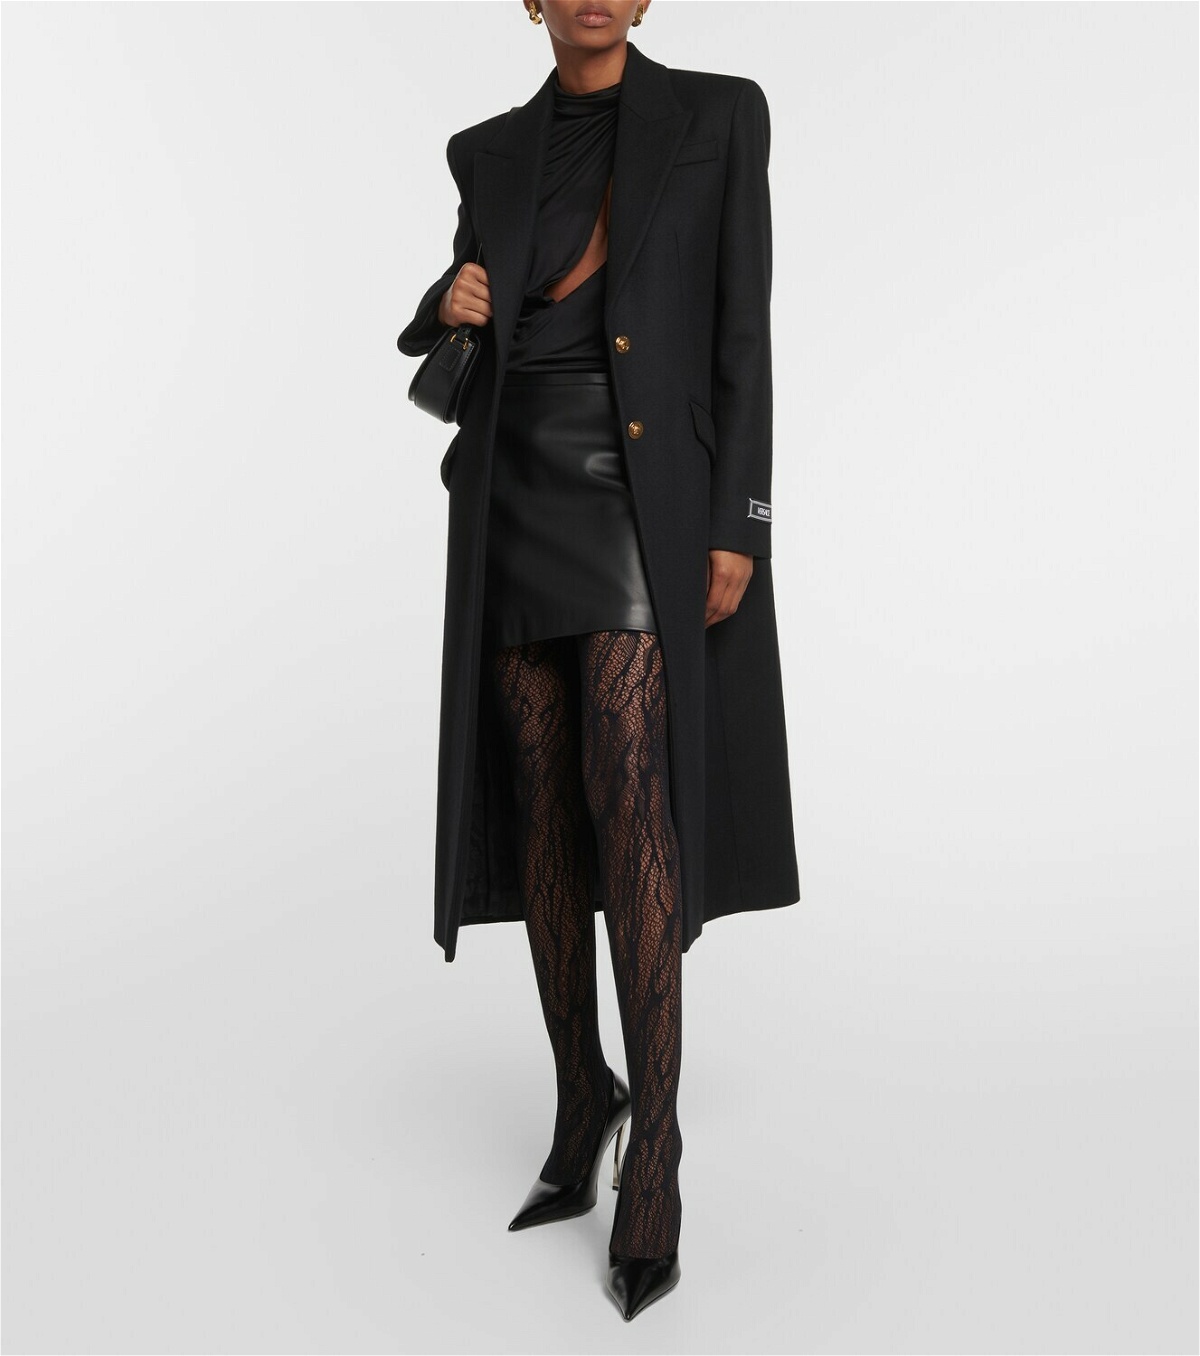 Wolford Snake Lace Tights Stockings IN Snake Leather